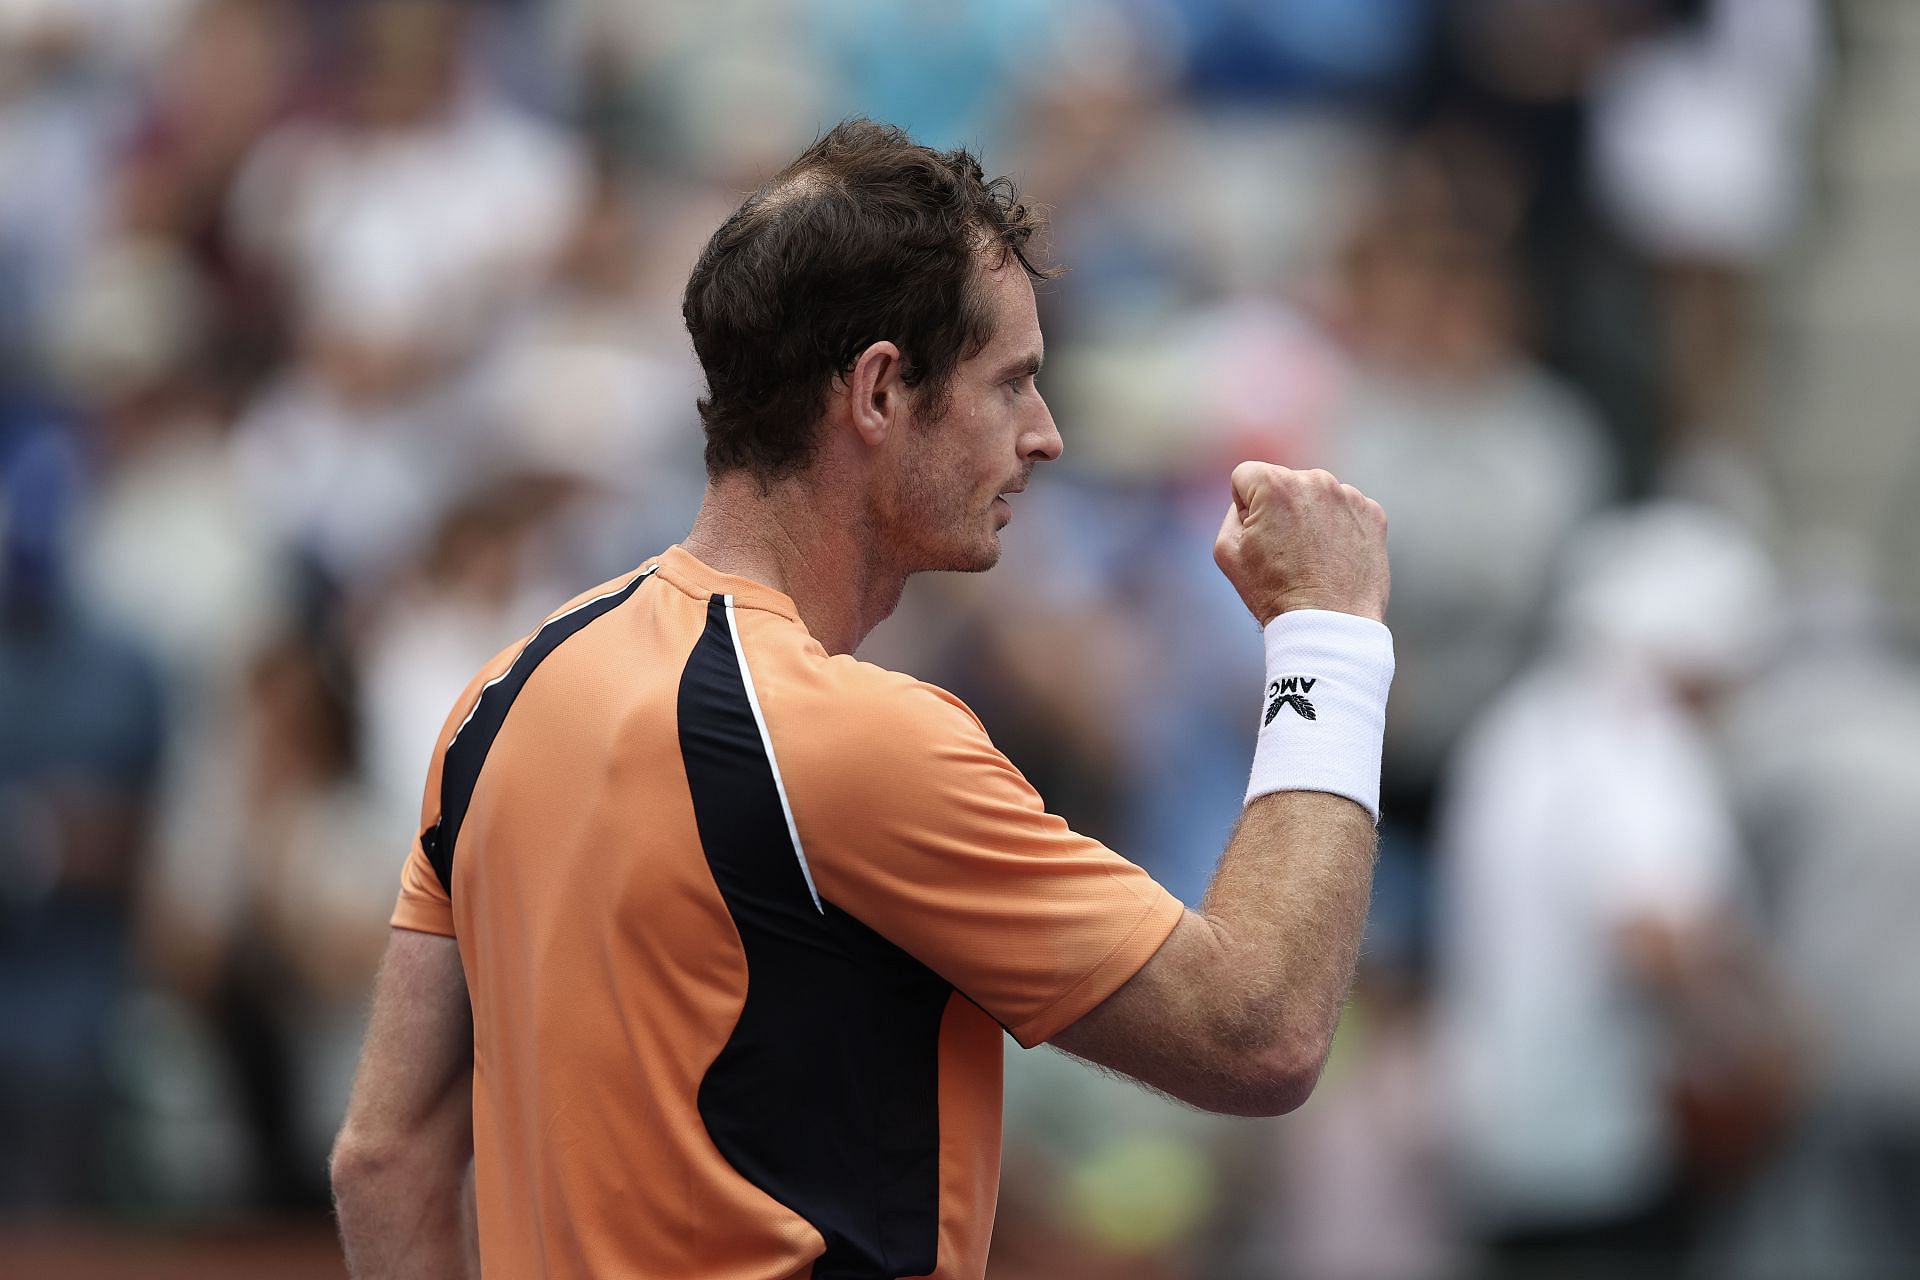 Andy Murray&#039;s best finish at the Indian Wells Masters came in 2009 as a finalist.